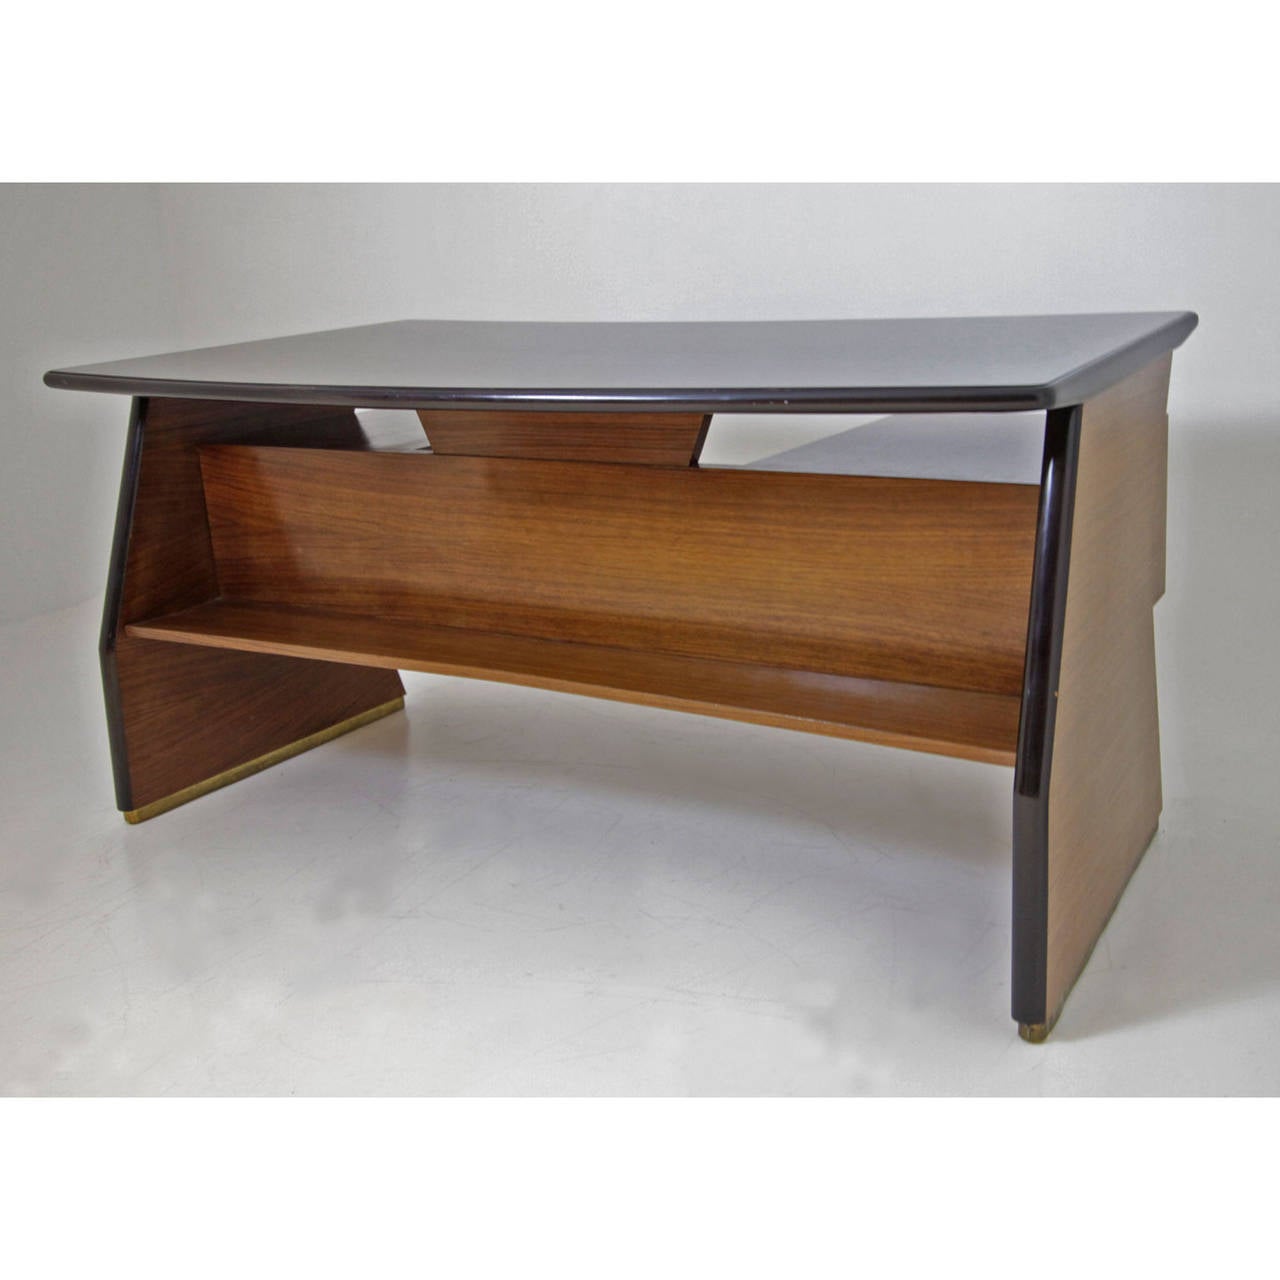 20th Century Wonderful Italian Desk, Dating from the 1940s